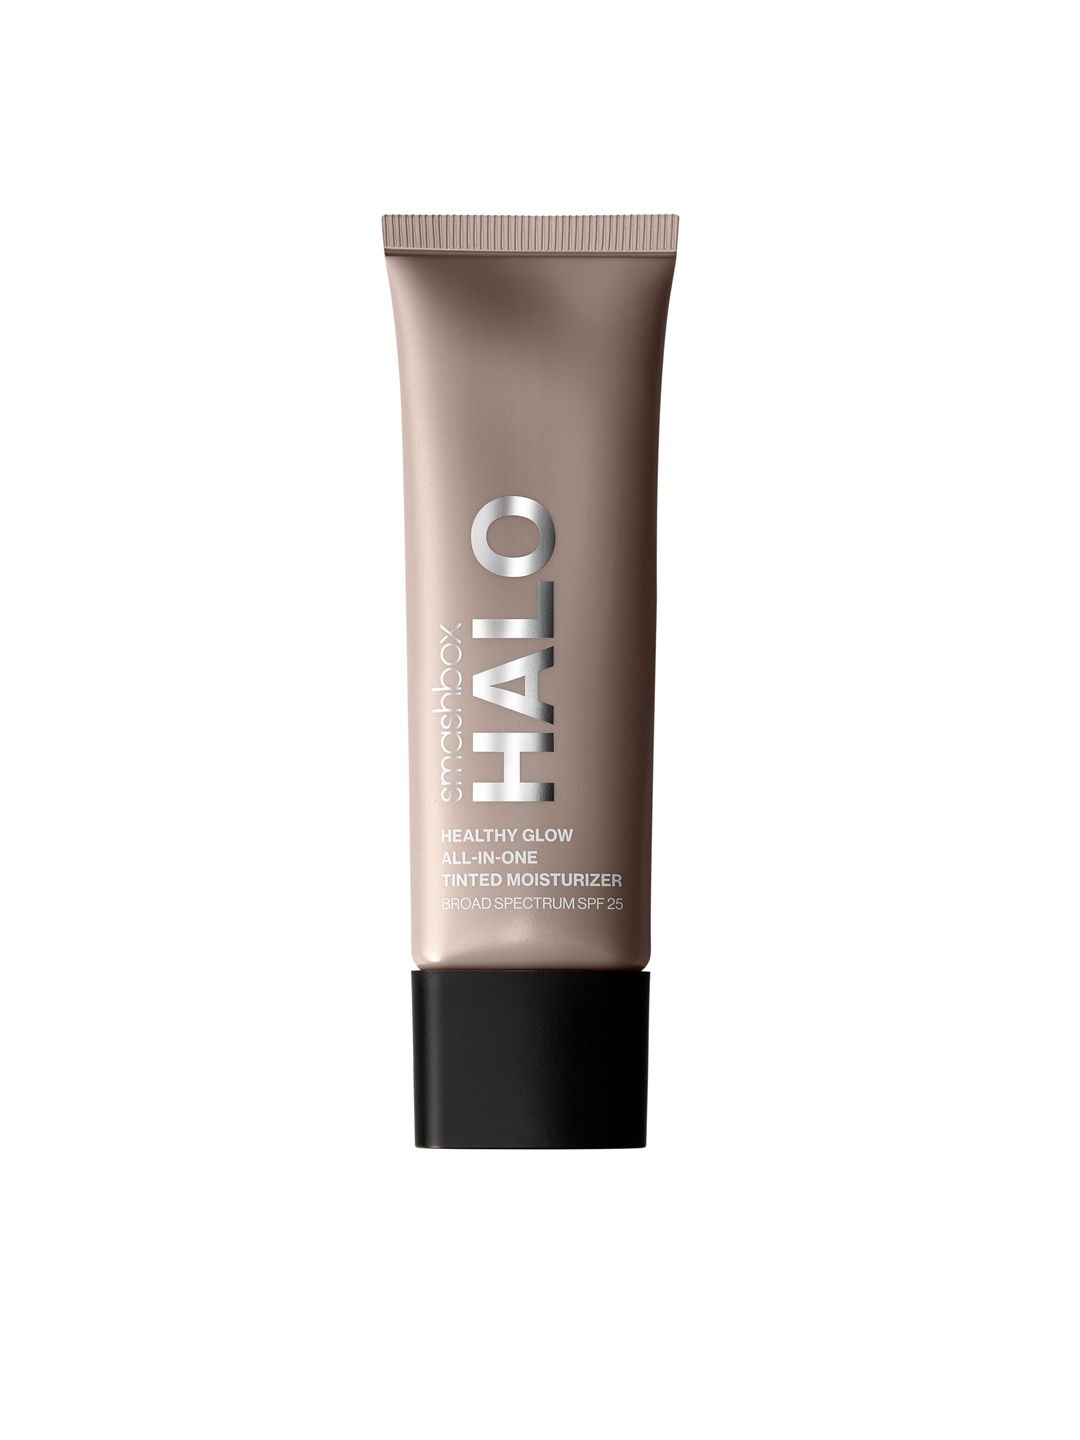 Smashbox HALO HEALTHY GLOW All in 1 Primer Price in India